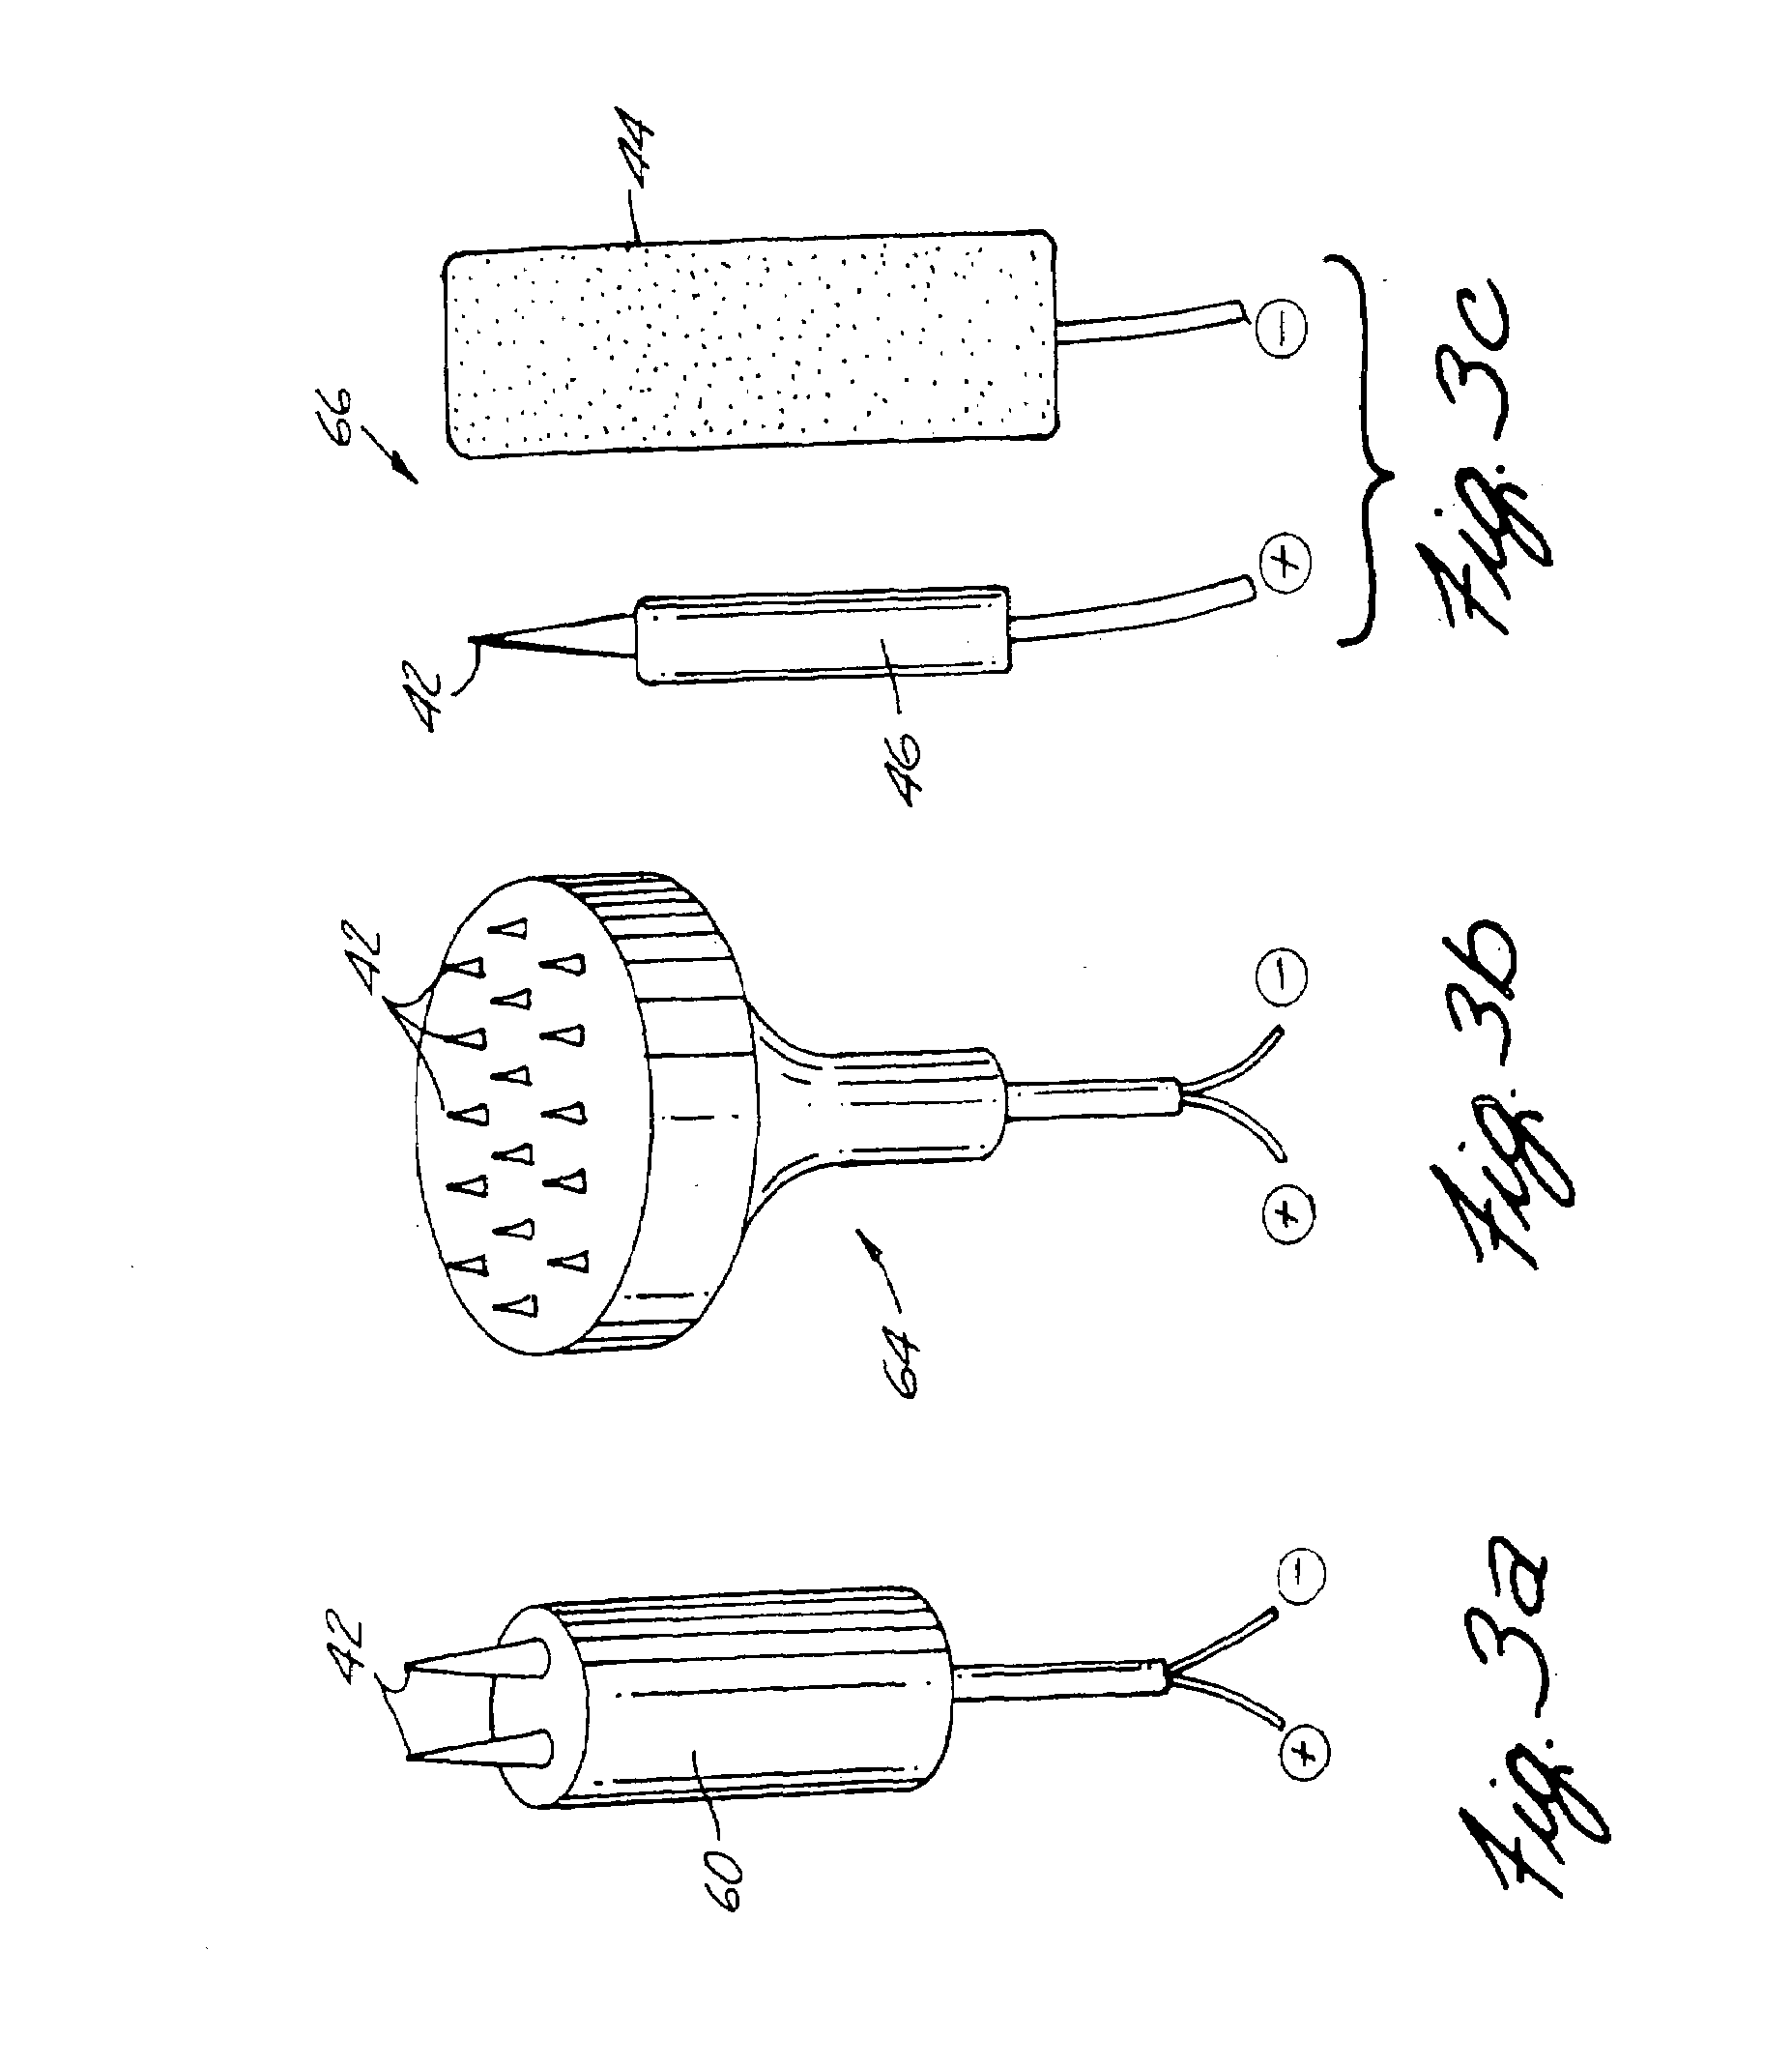 Apparatus and Method for Reducing Subcutaneous Fat Deposits, Virtual Face Lift and Body Sculpturing by Electroporation